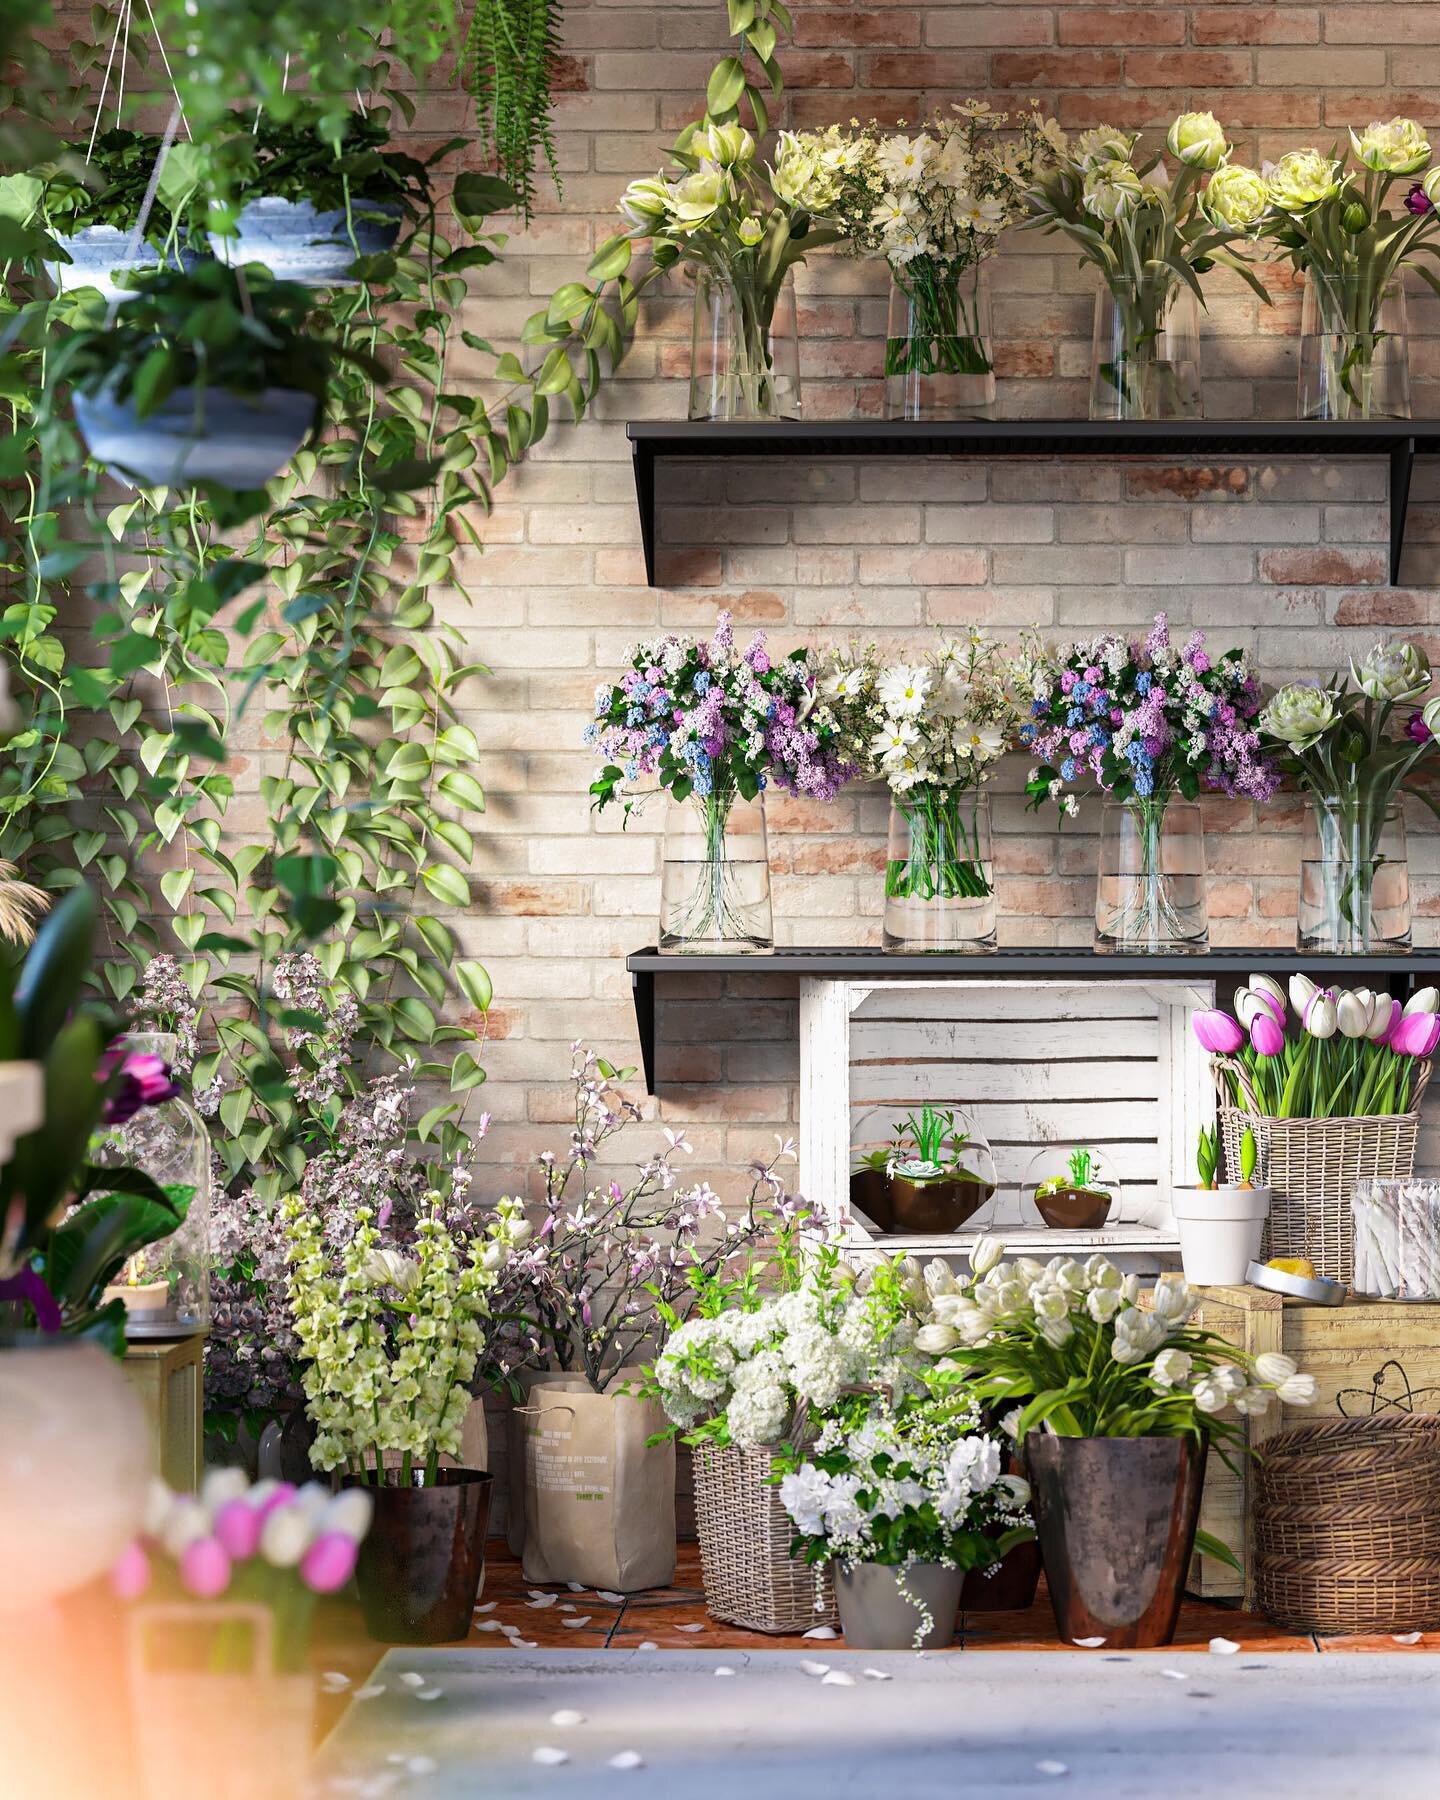 Happy Friday !
In honor of one of our teammates last weeks with BOLDR , we are happy to share a this beautiful rendering from a previous flower shop project he worked on. 
.
.
Stay tuned for our holiday image coming next Friday! 
.
.
#archviz #archit